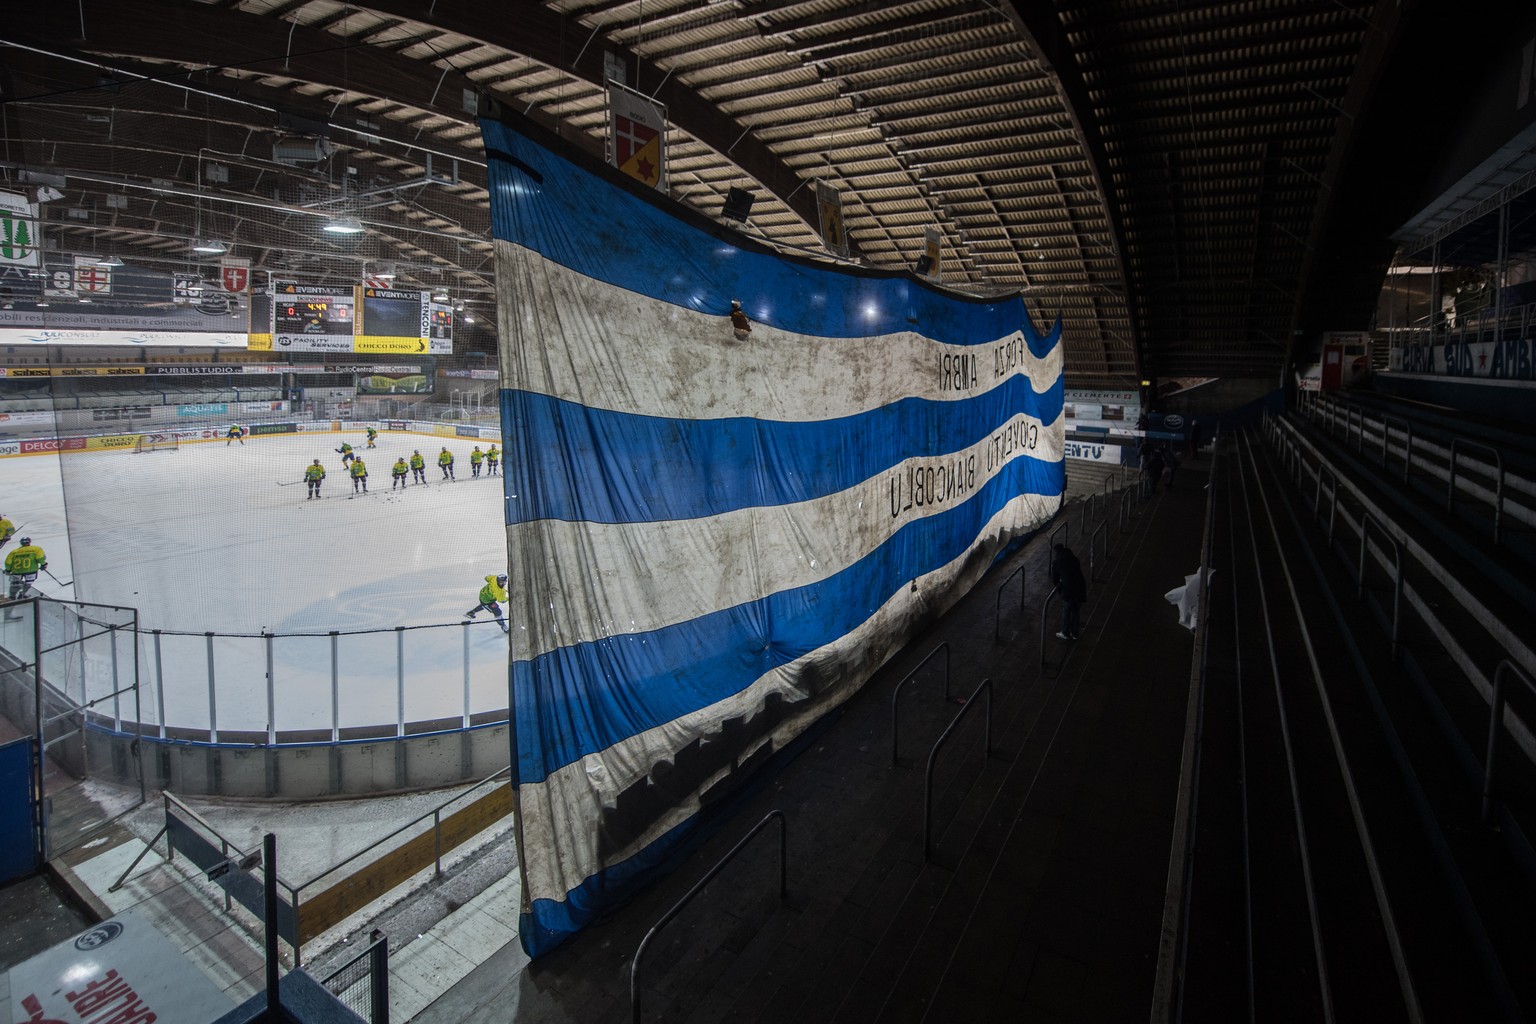 No spectators are in the ice Stadium Valascia before the preliminary round game of National League A (NLA) Swiss Championship 2019/20 between HC Ambri Piotta and HC Davos at the ice stadium Valascia i ...